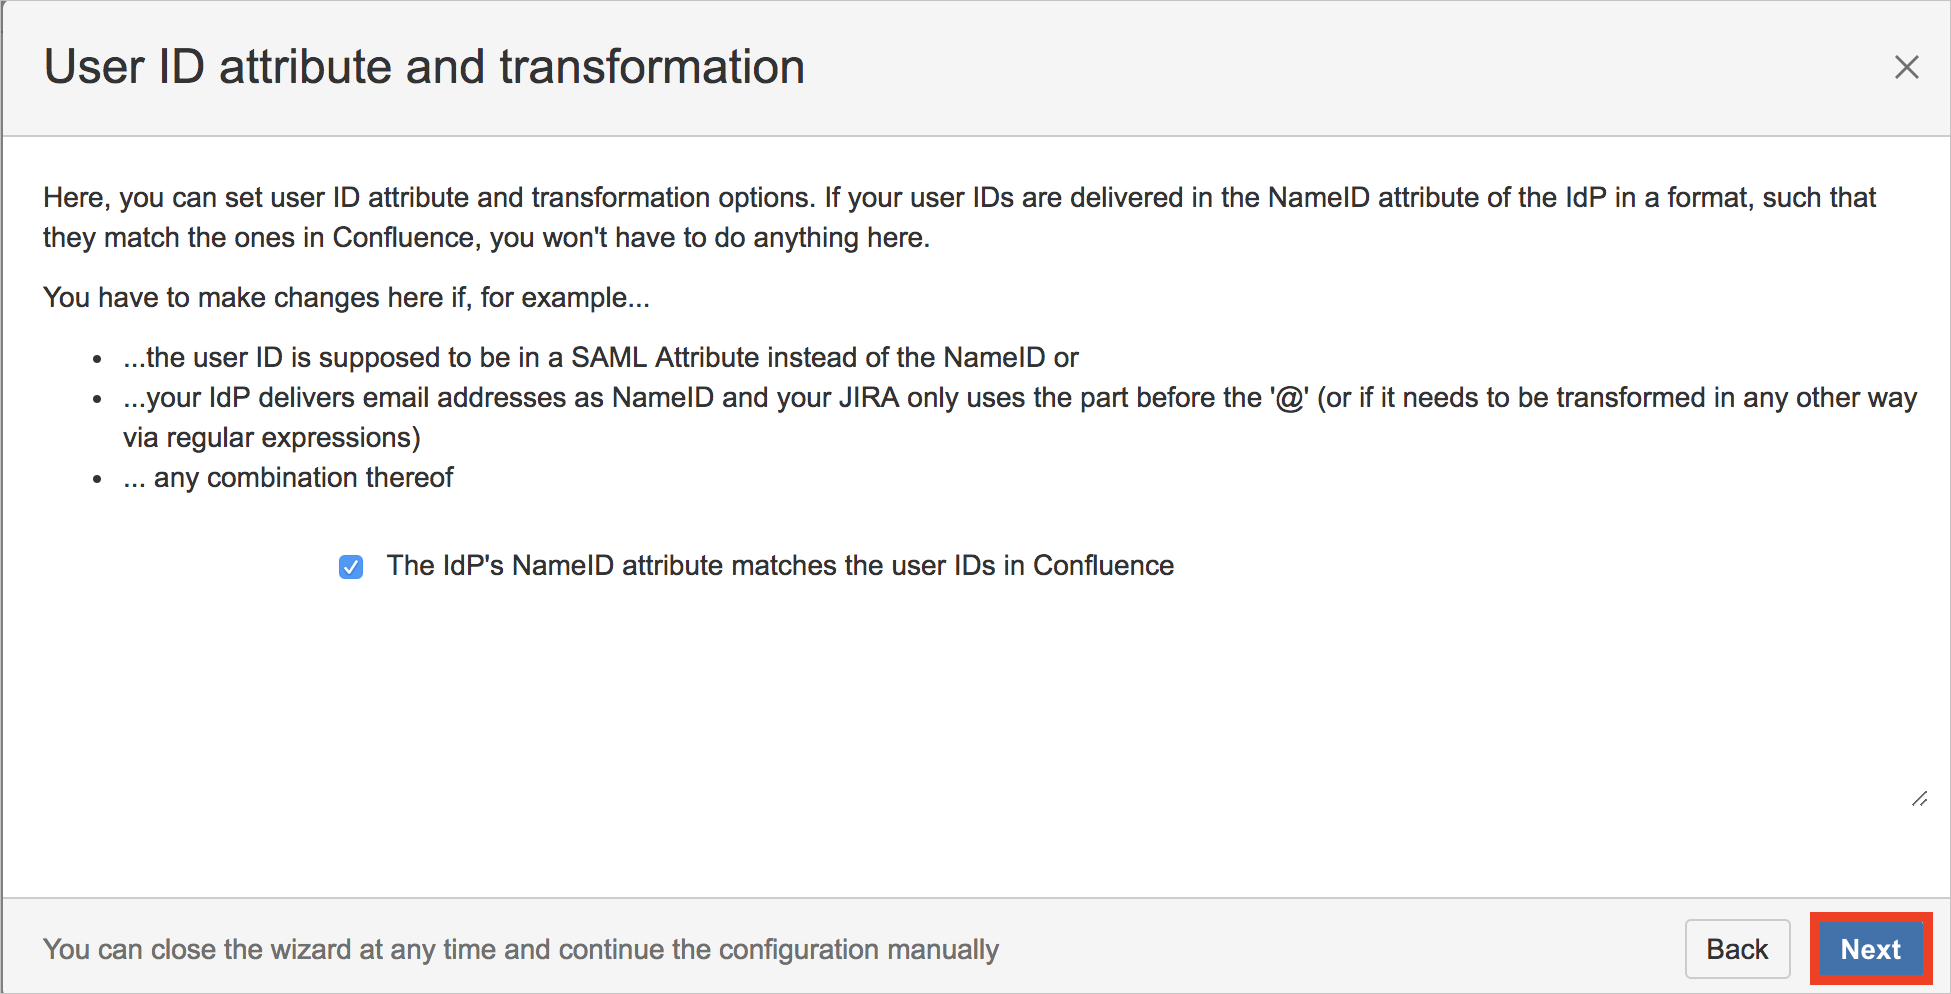 Screenshot that shows the "User I D attribute and transformation" page with the "Next" button selected.